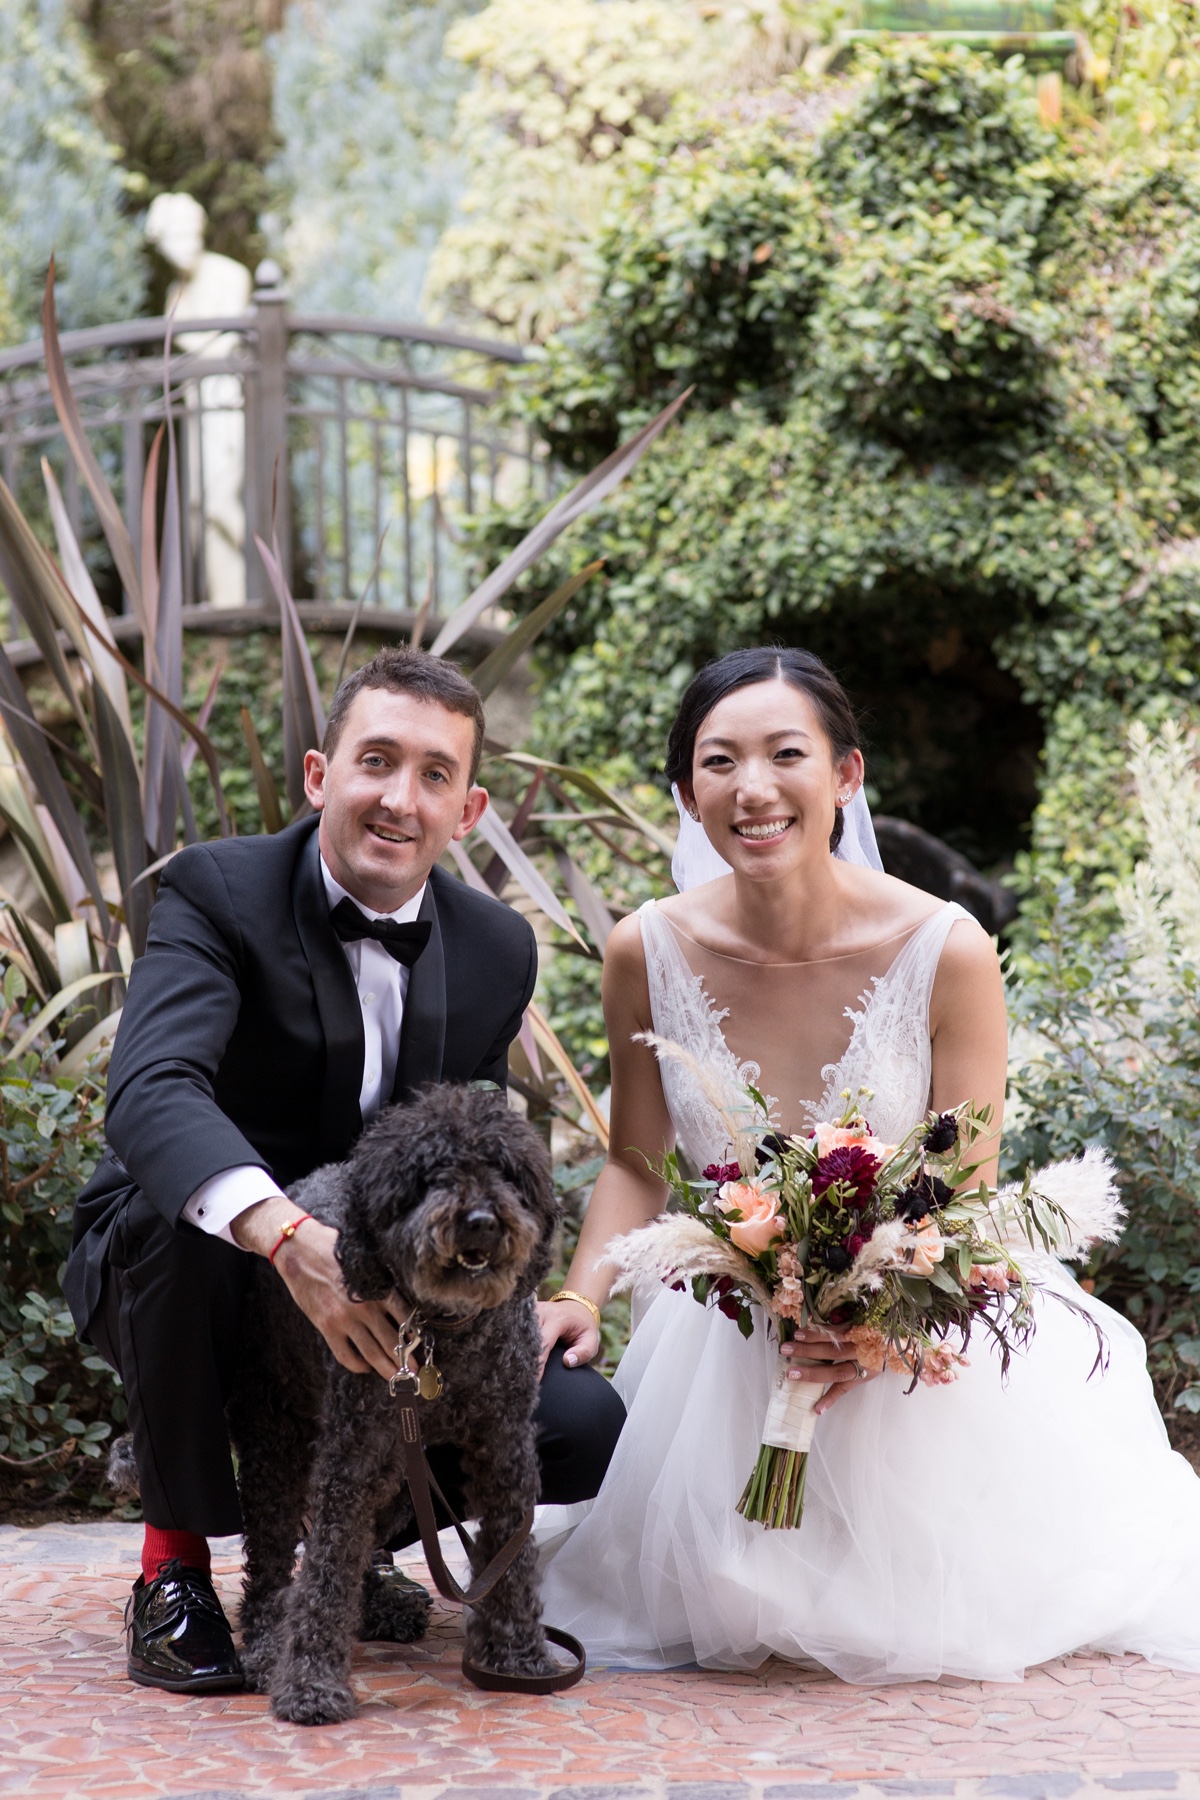 los angeles wedding venues that allow dogs